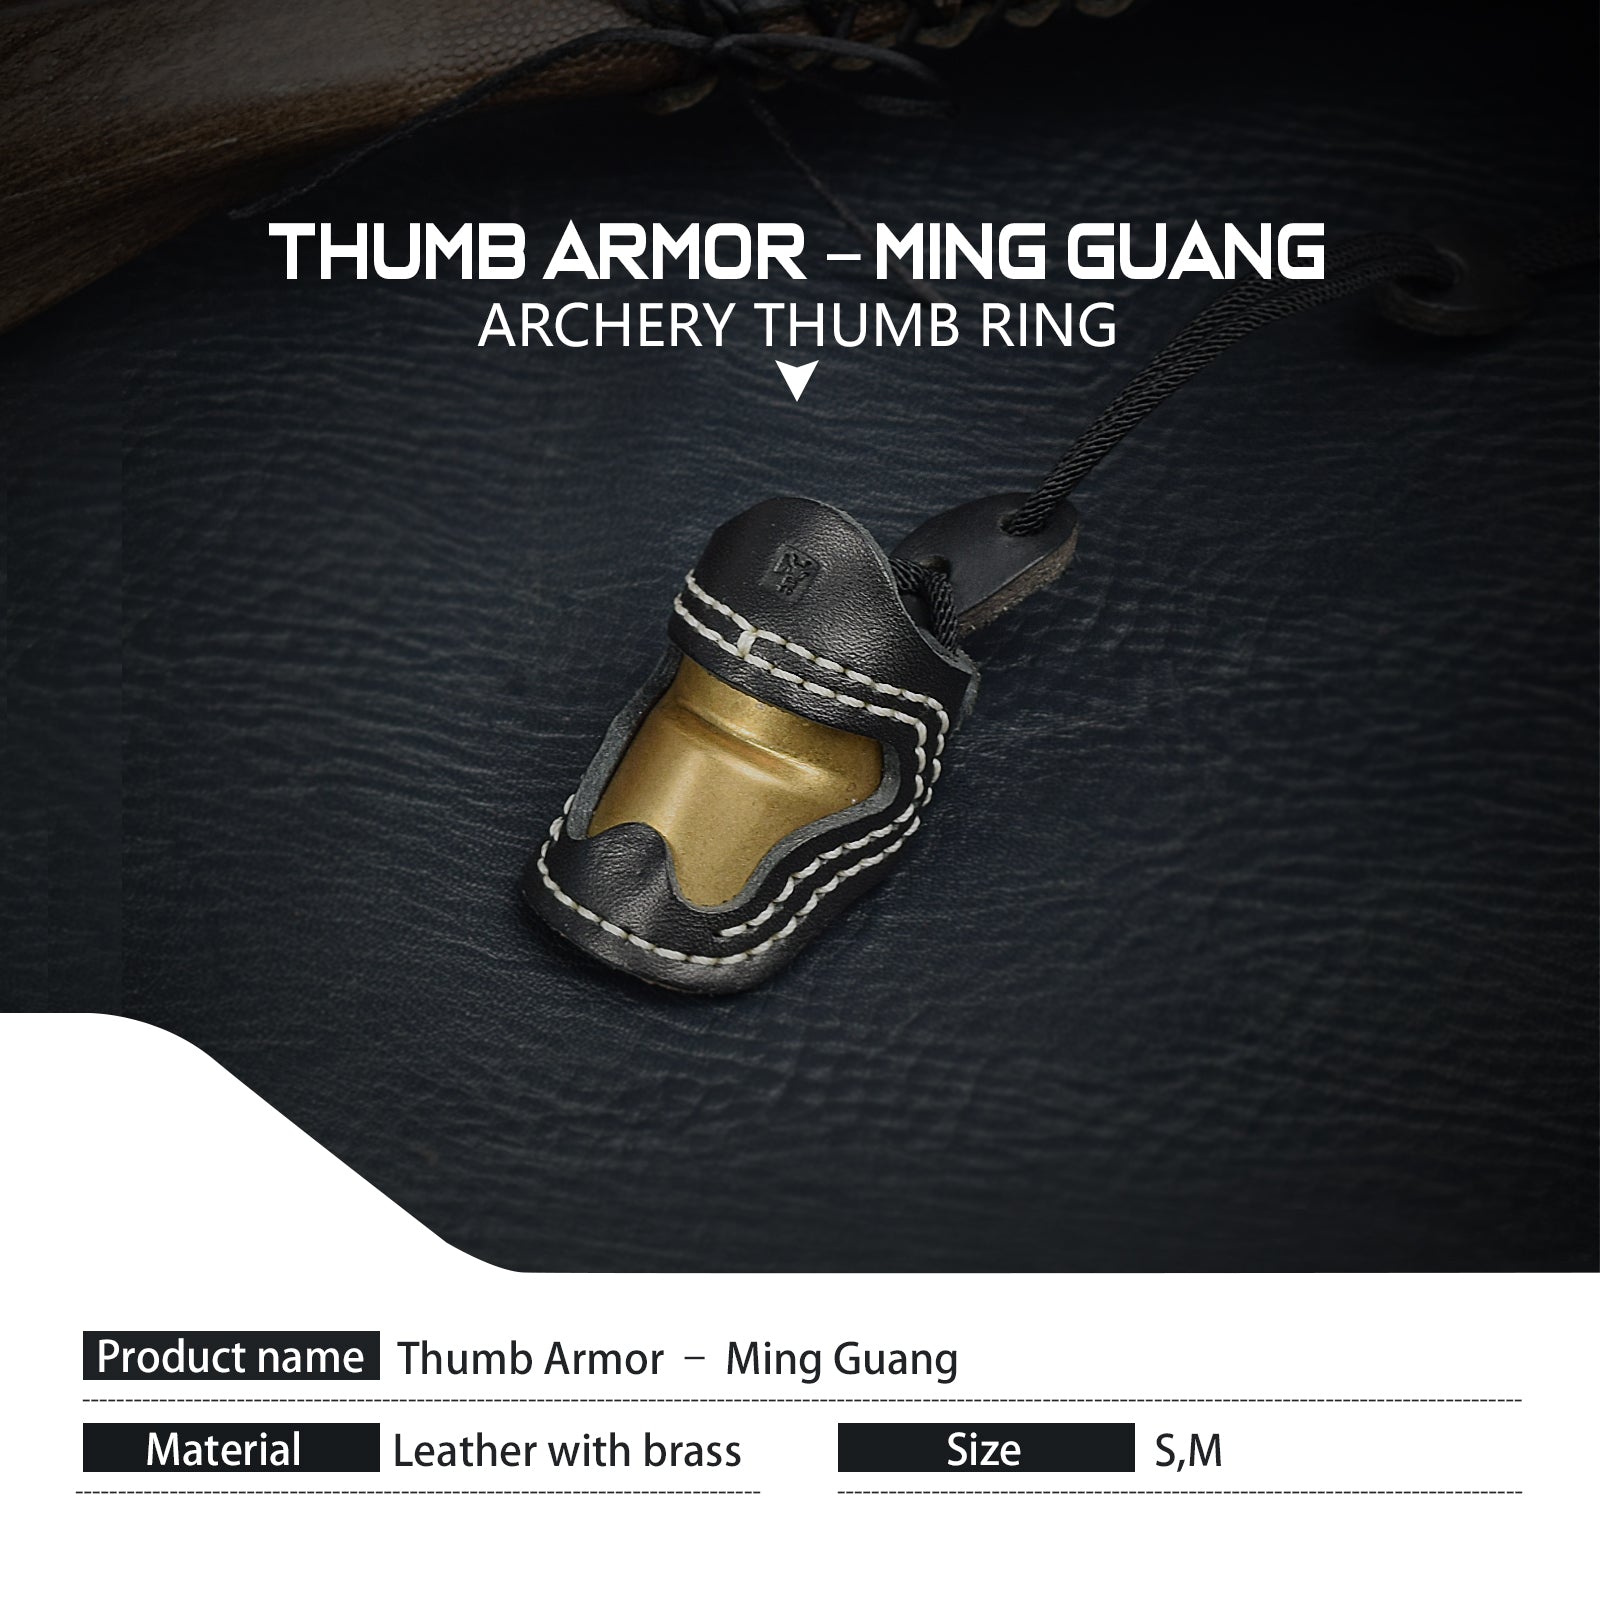 NEW Soft Leather & Brass Thumb Armor Ming Guang Archery Thumb Ring And Wrist Strap Archery Finger Protector